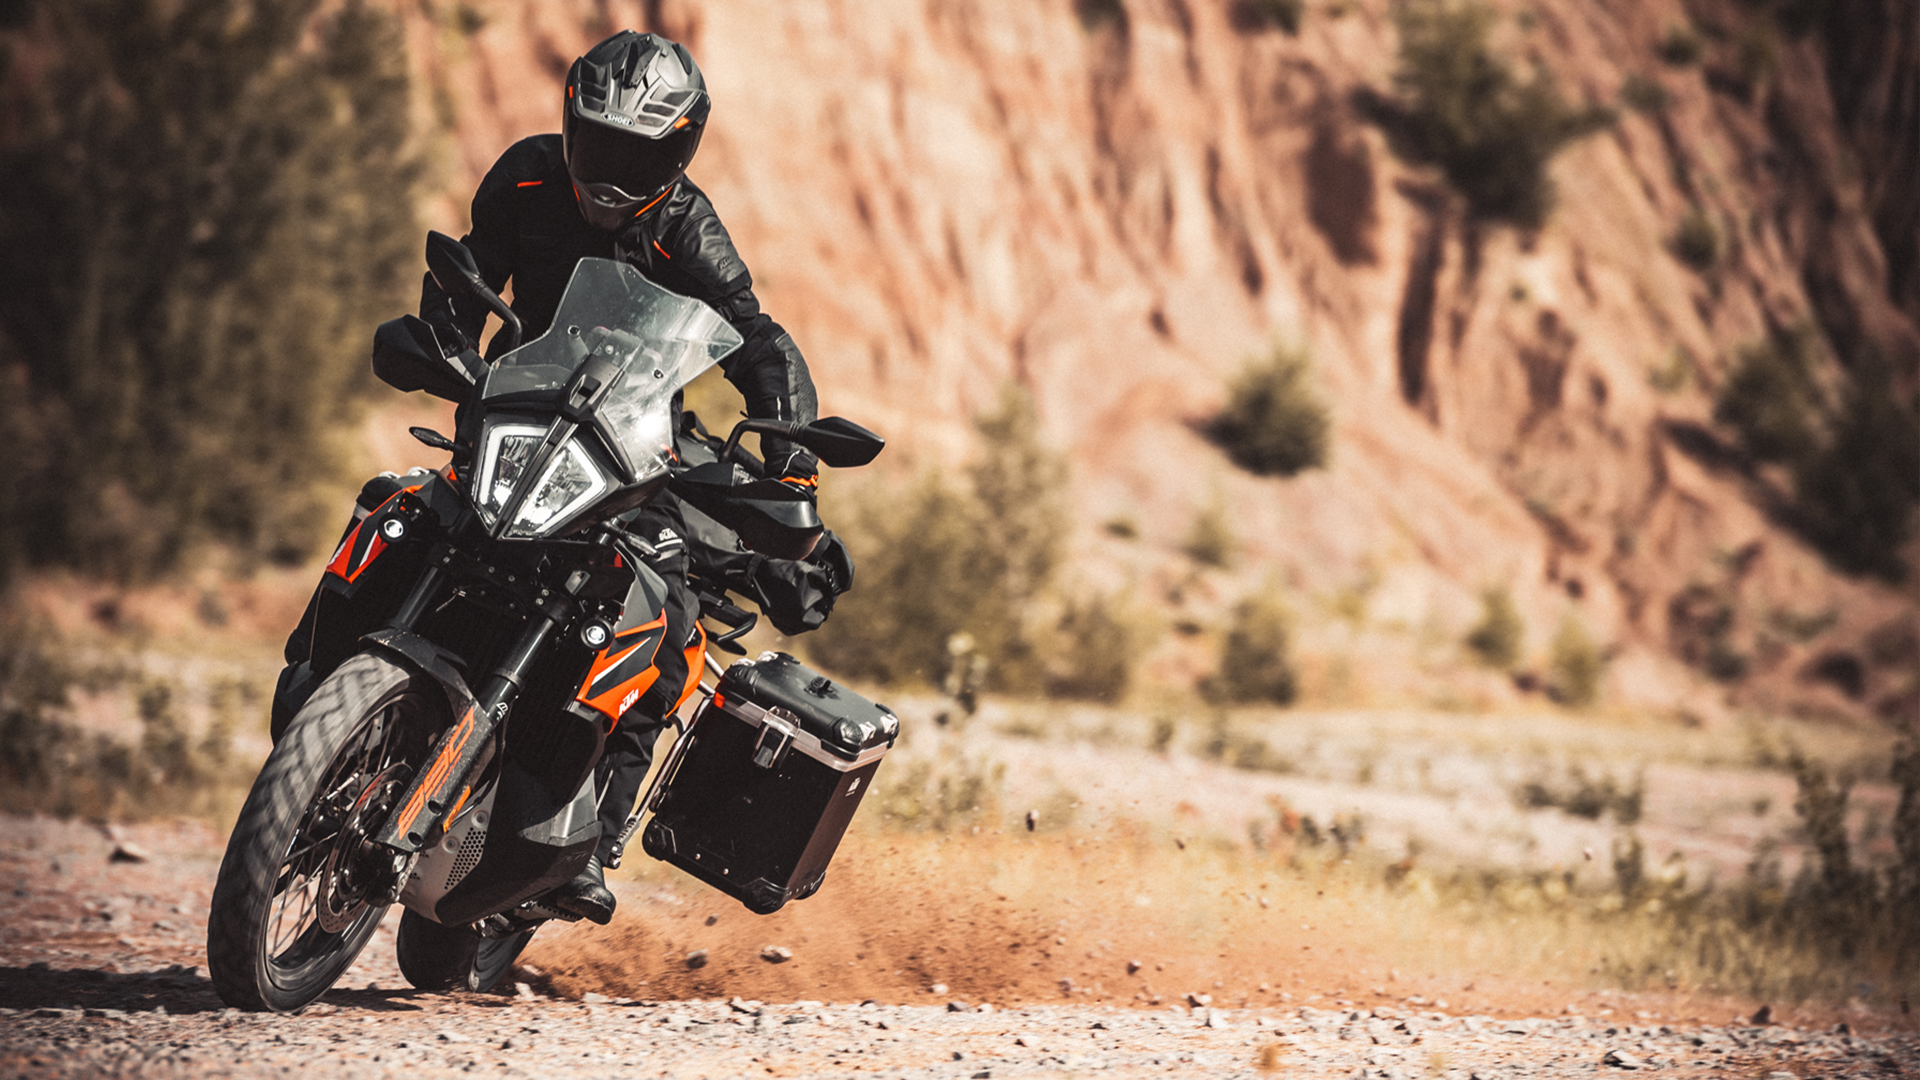 You get plenty of engine performance from the KTM 890.